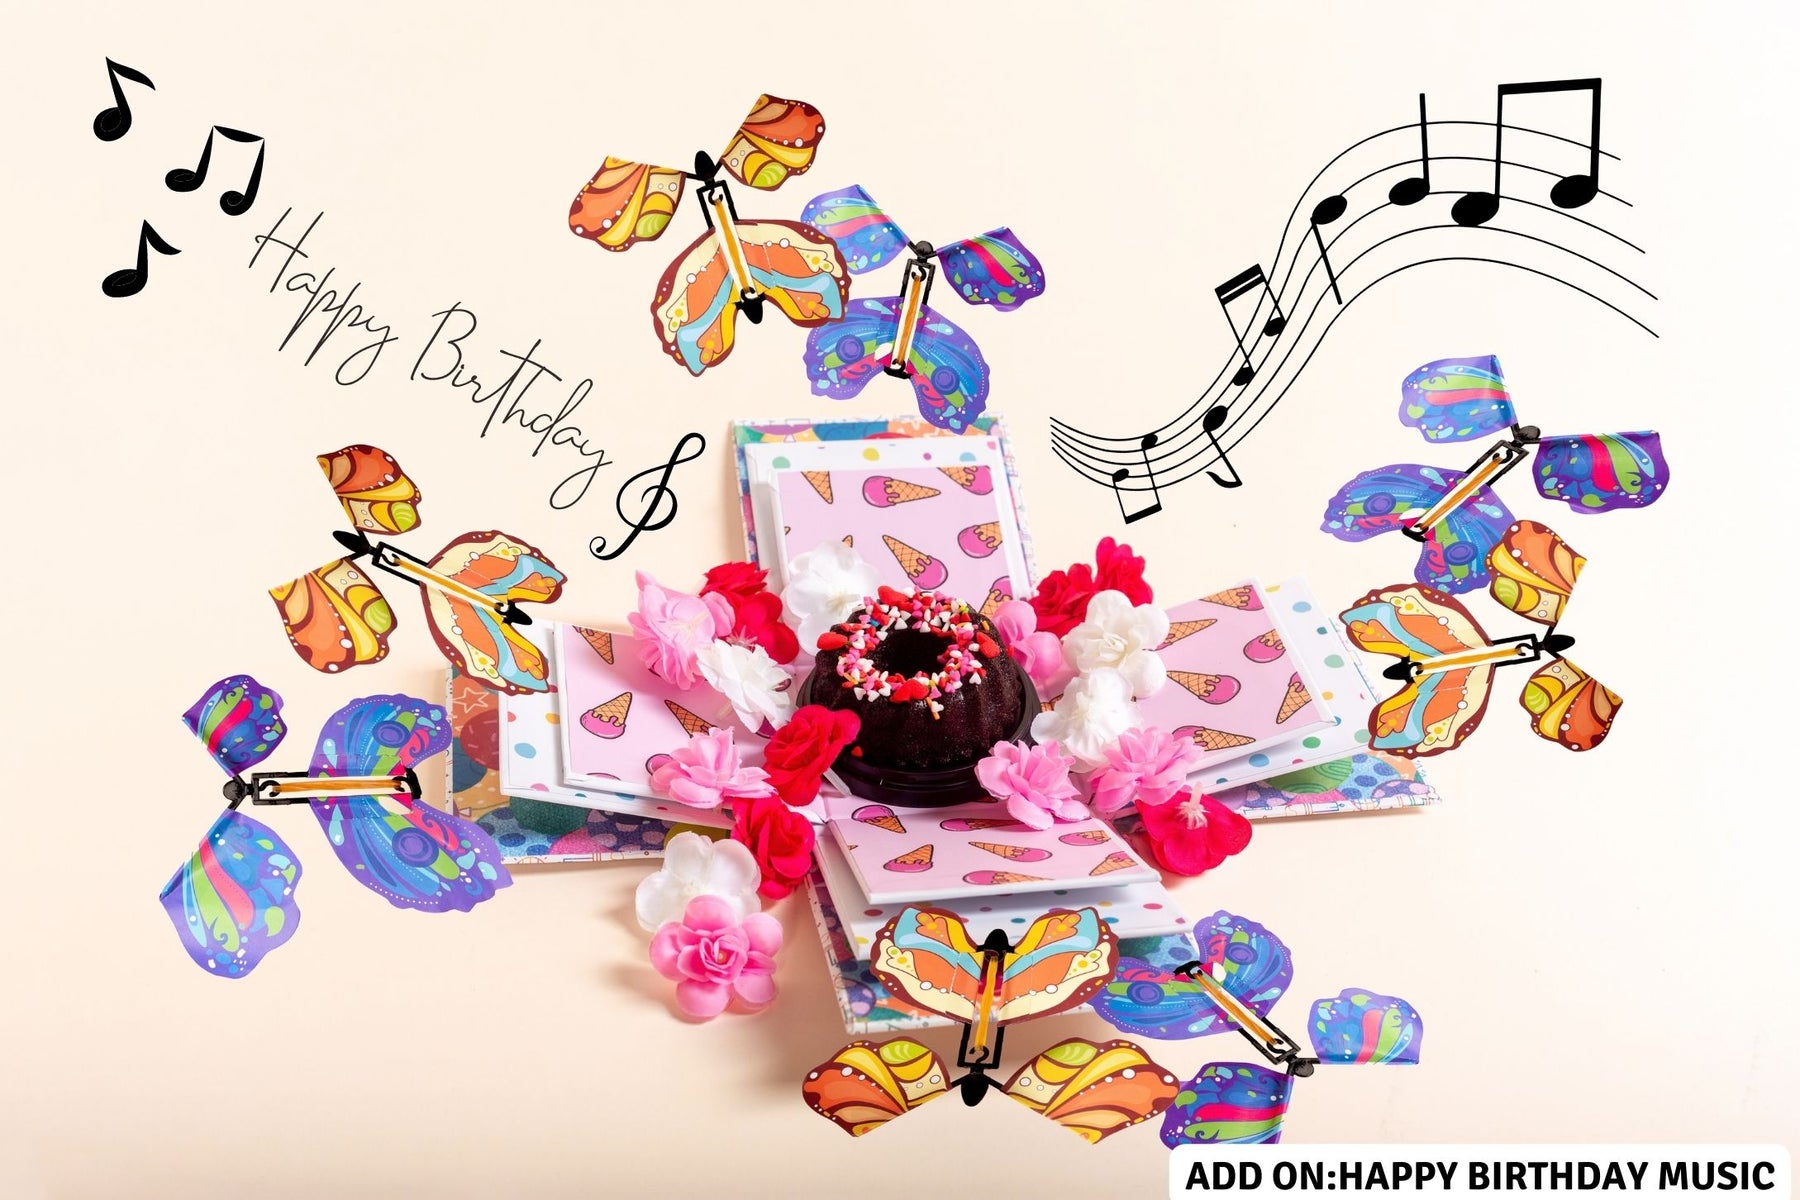 Butterfly Explosion Box with Cake, Flowers, Goodies , music - the Perfect Surprise Gift from SWEET SURPRISES SG